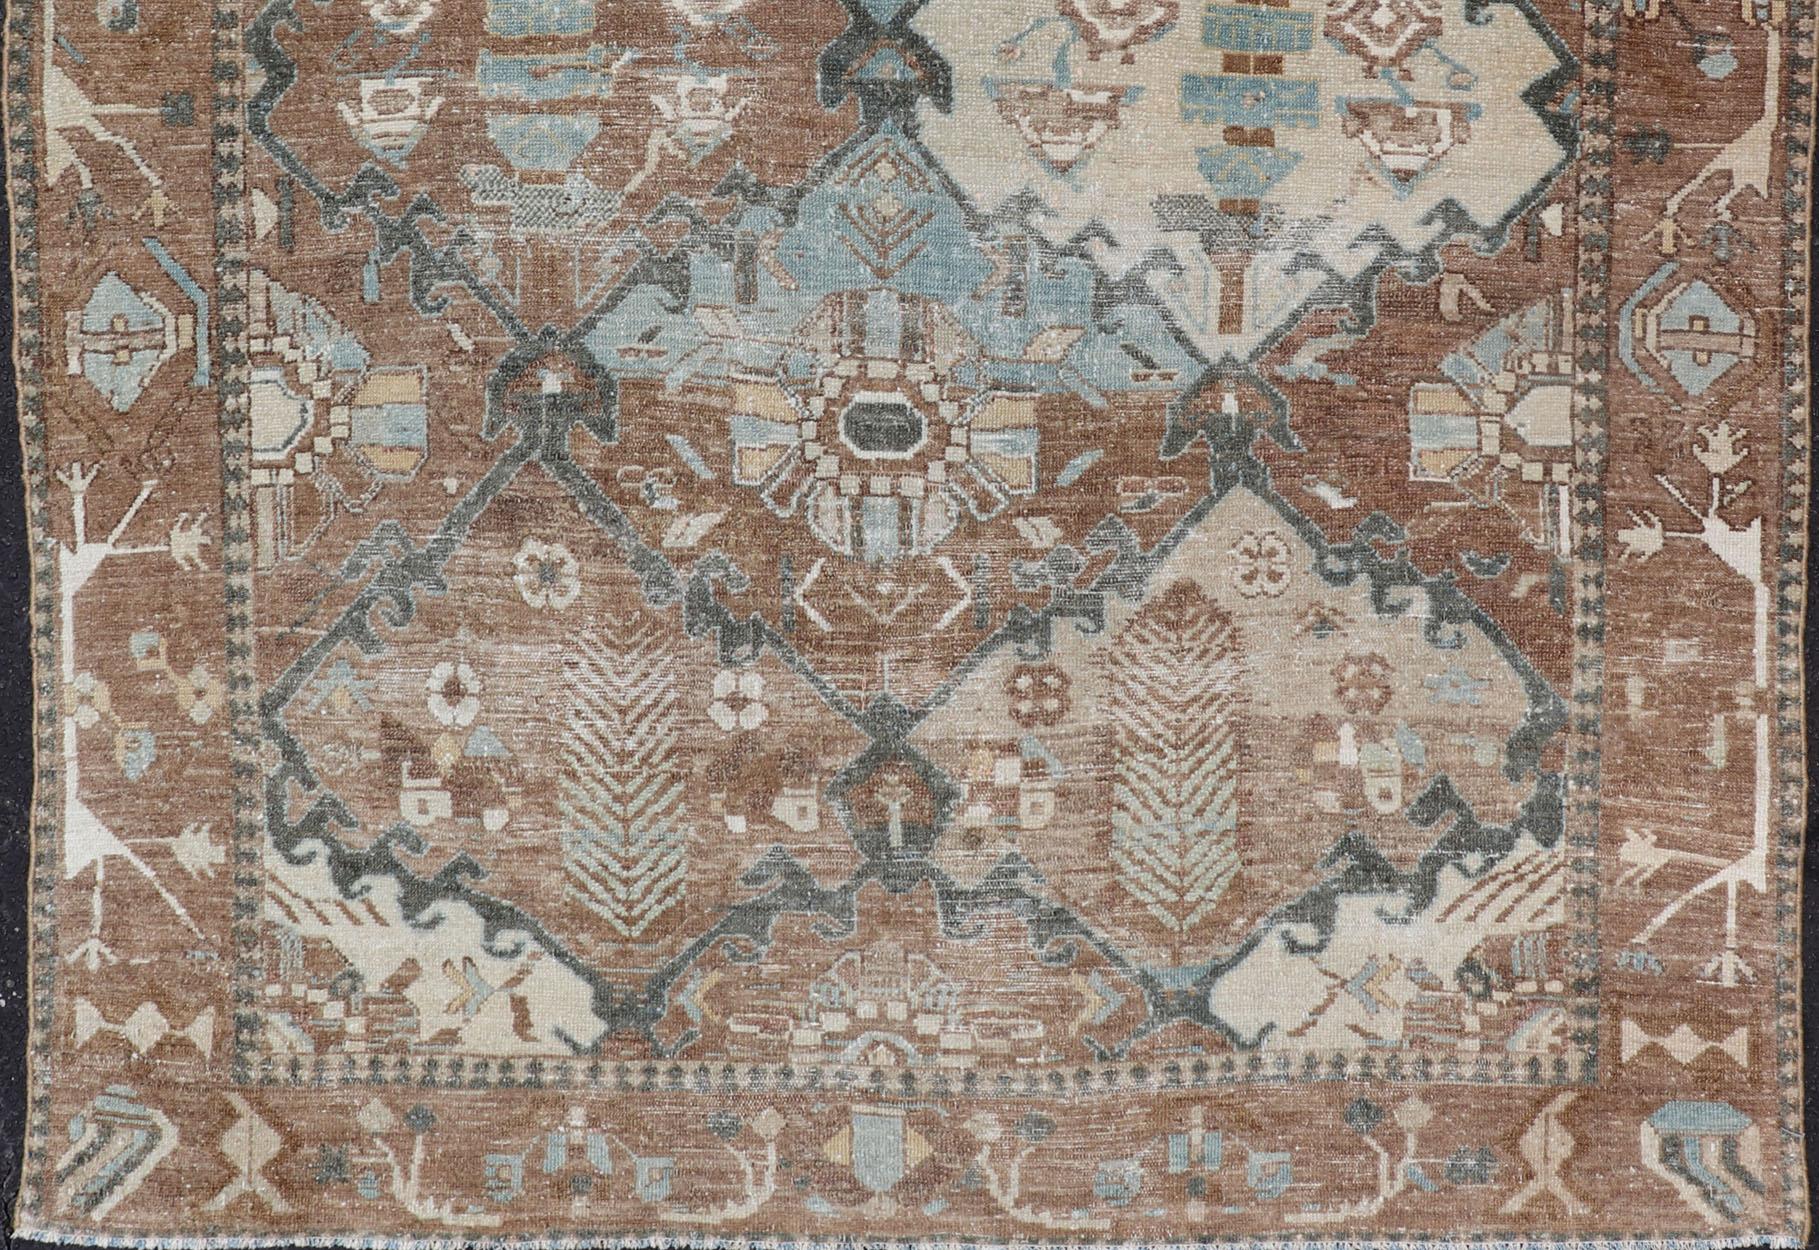 Hand-Knotted Antique Persian Bakhitari Rug with All-Over Patten in Earthy and Brown Tones